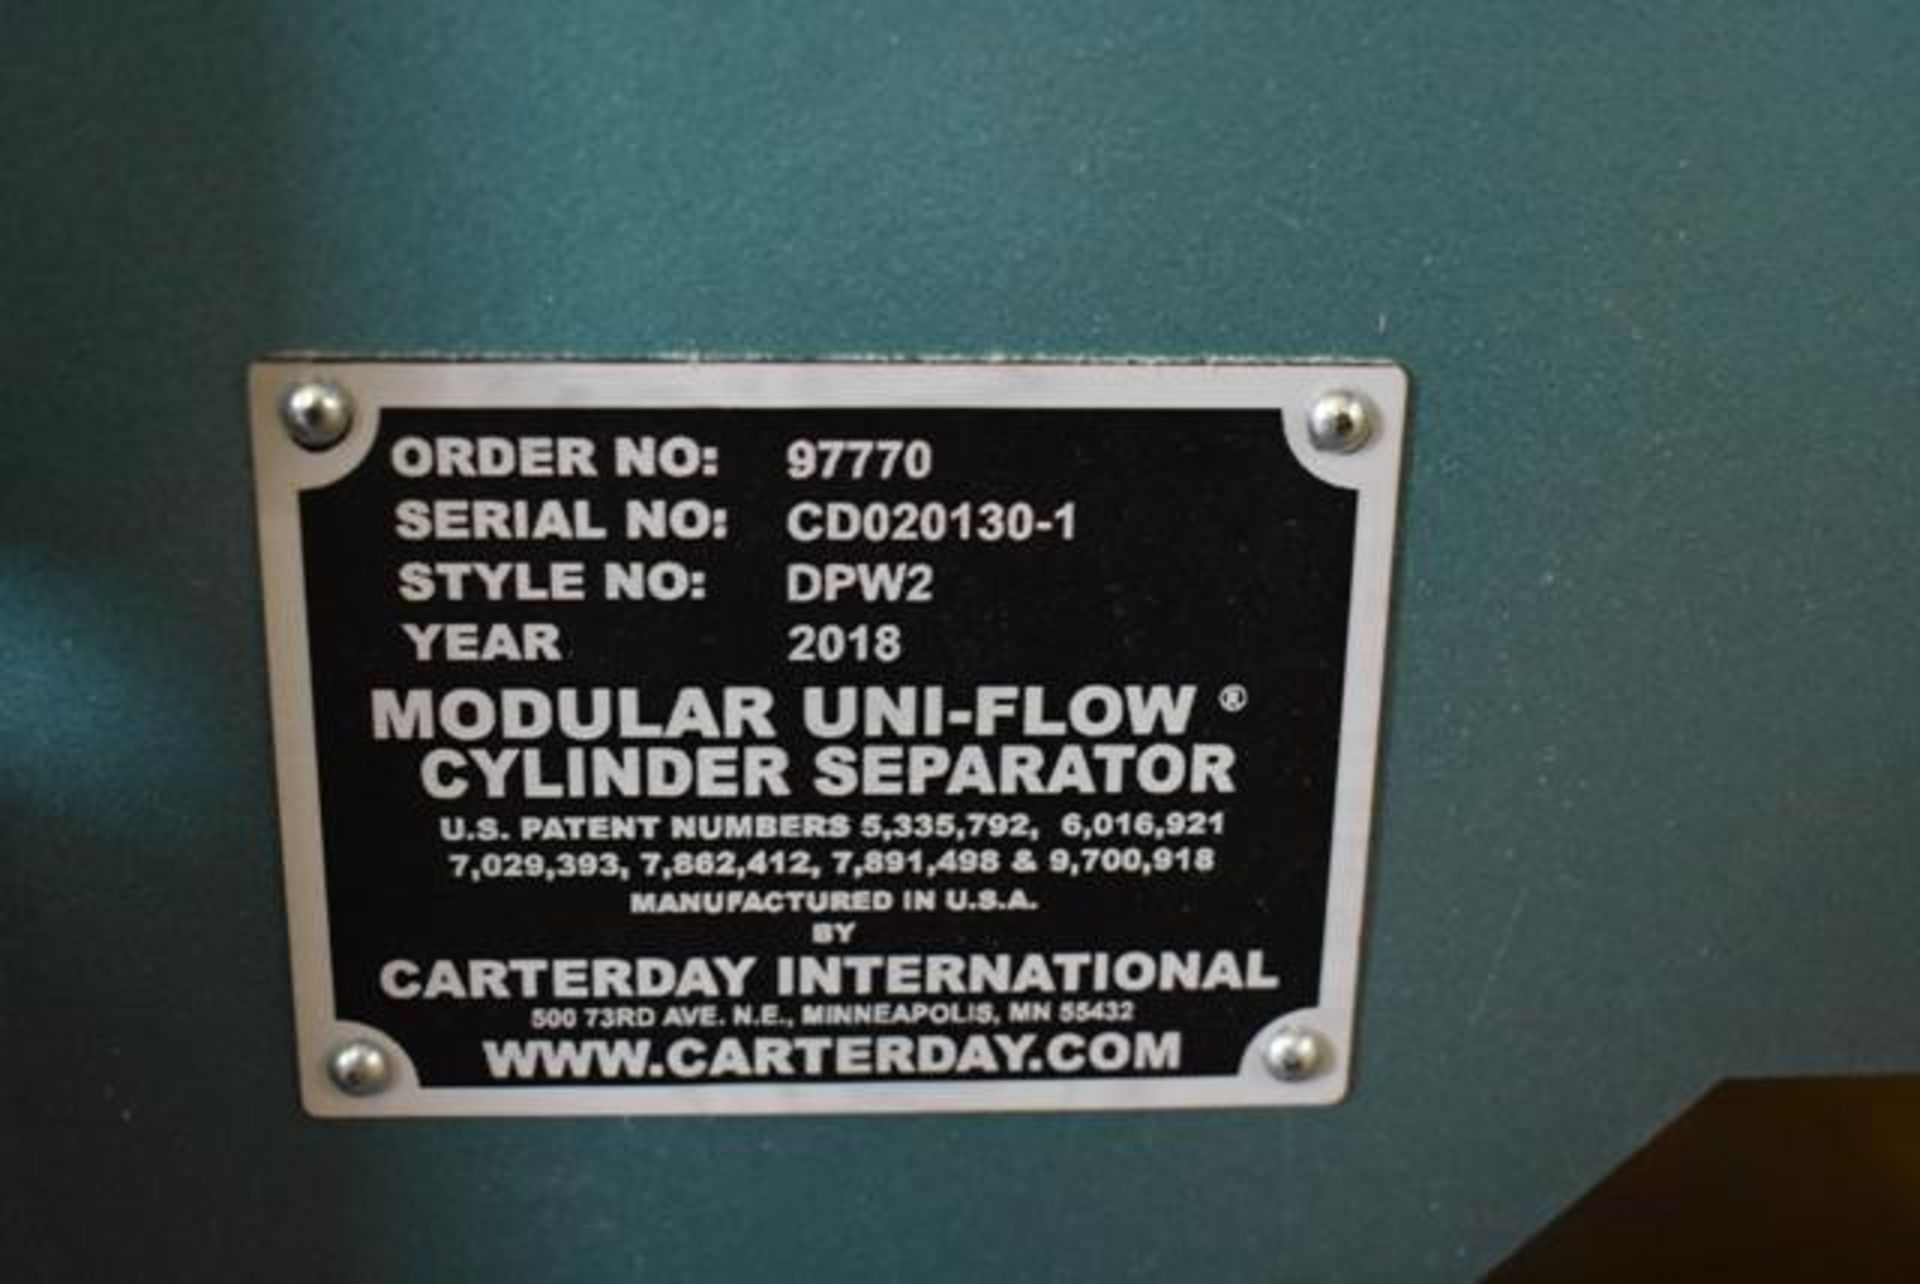 2018 Carter Day/Jacobson Modular Uni-Flow Cylinder Separator, Style #DPW2 - Image 3 of 3